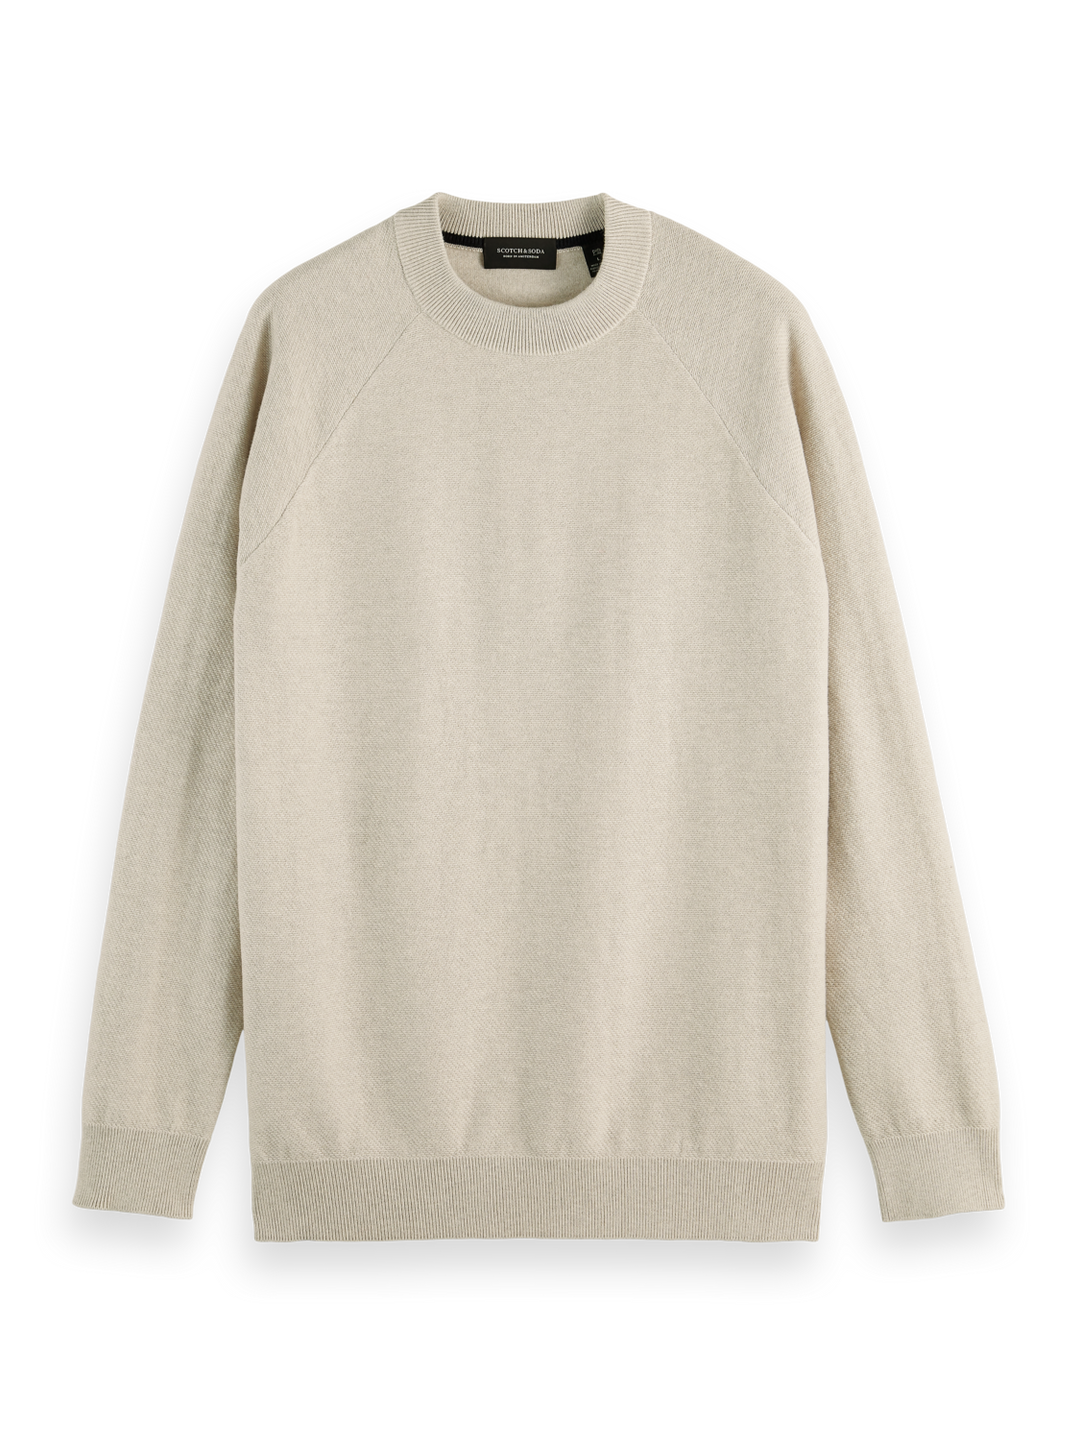 Structure-Knitted Raglan Sleeve Pullover in Stone Melange 